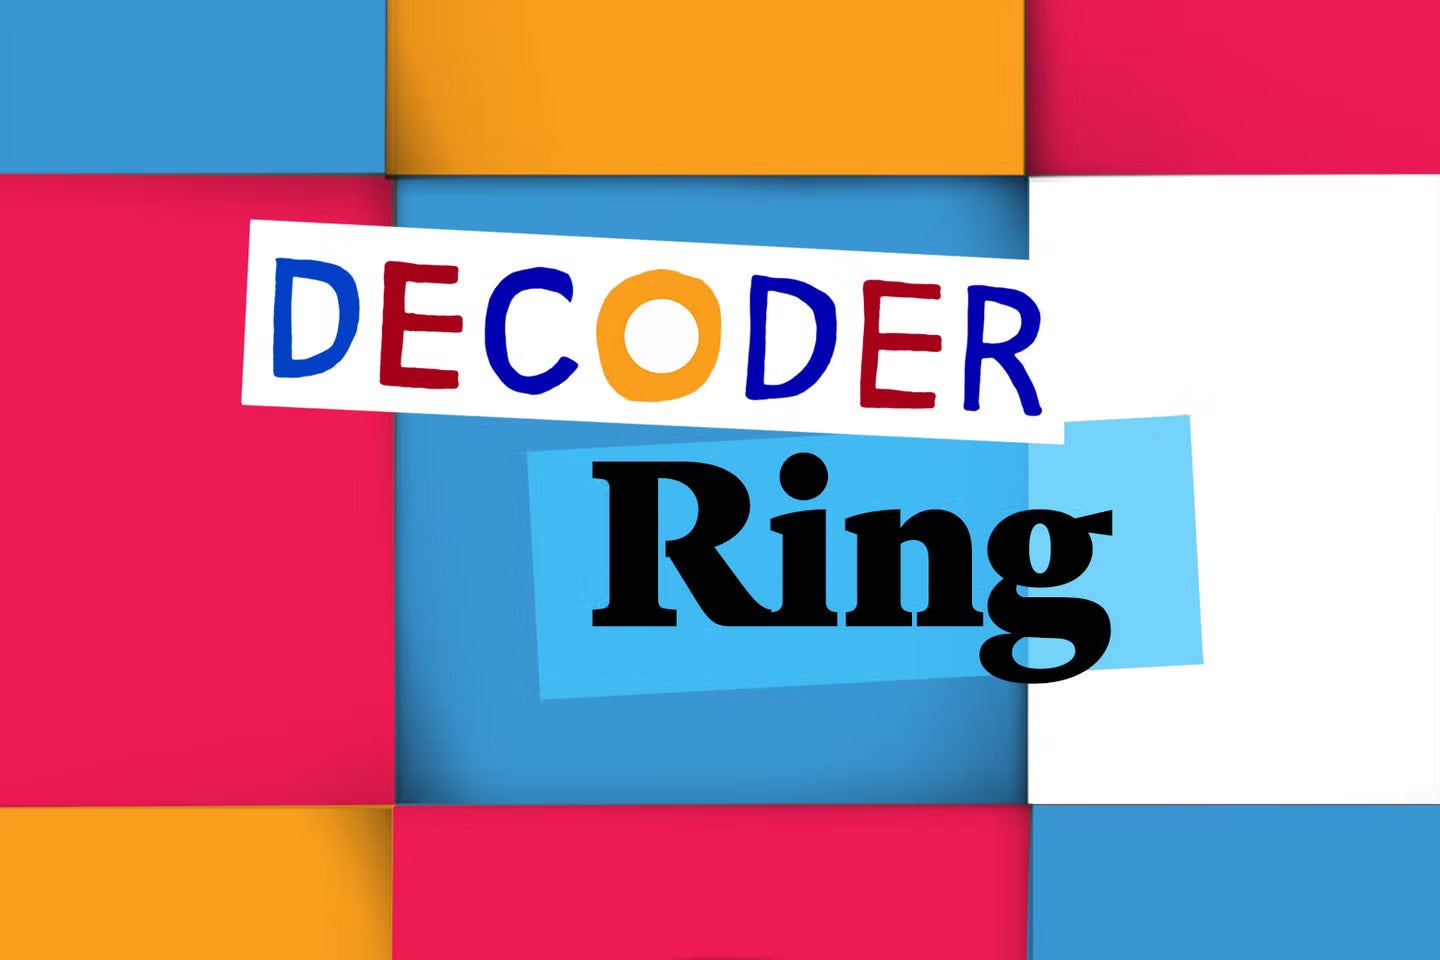 The words "Decoder Ring" against a background of pink, clementine, white, and blue squares.